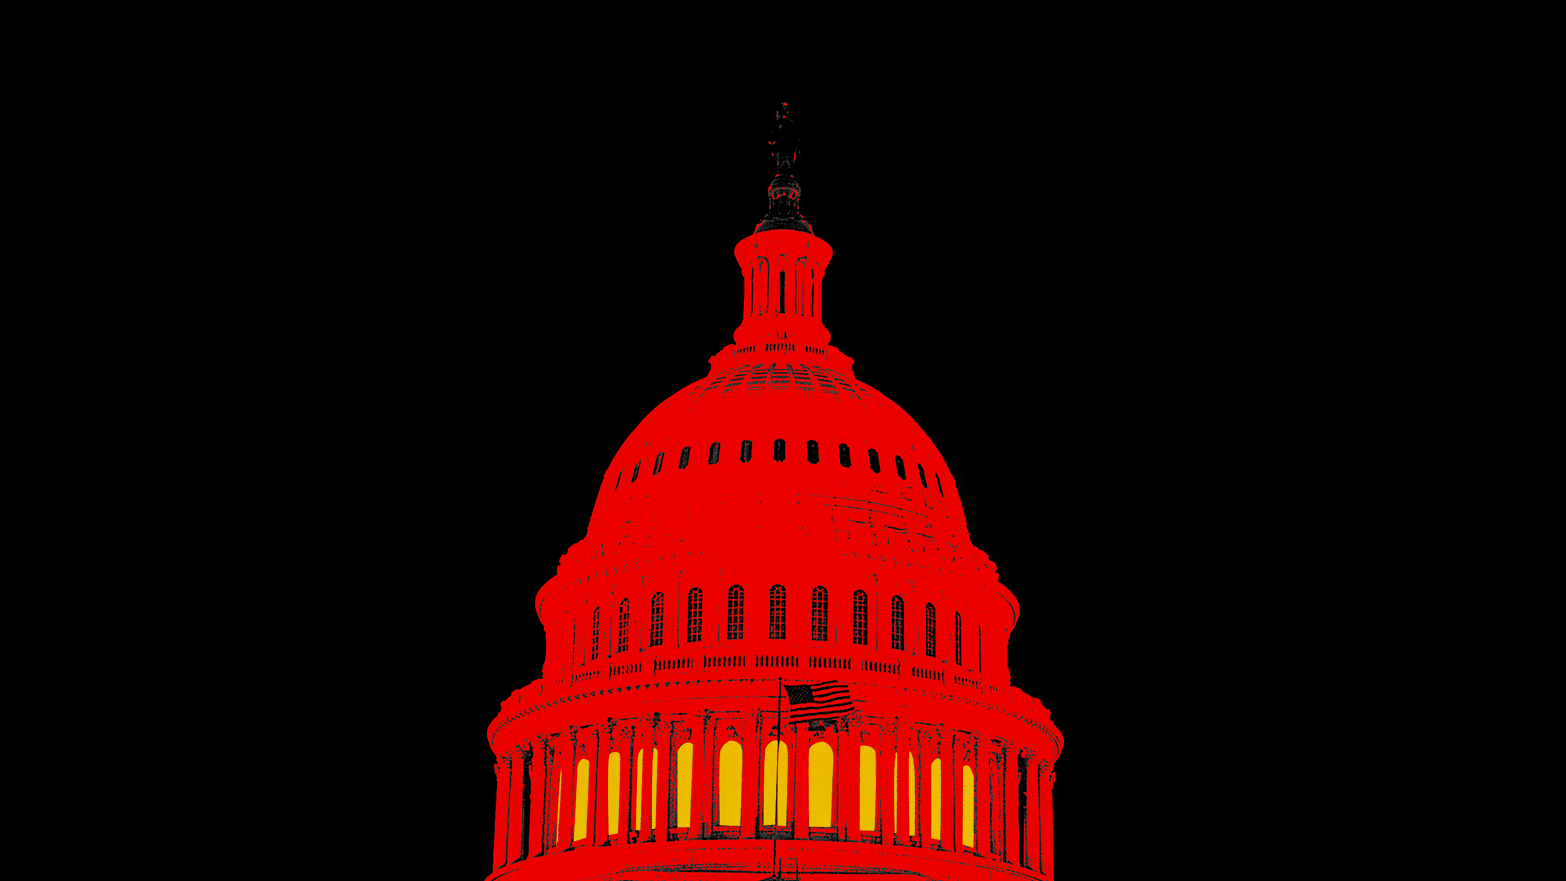 A photo illustration showing the U.S.A. government’s capitol building with flickering lights on and off.